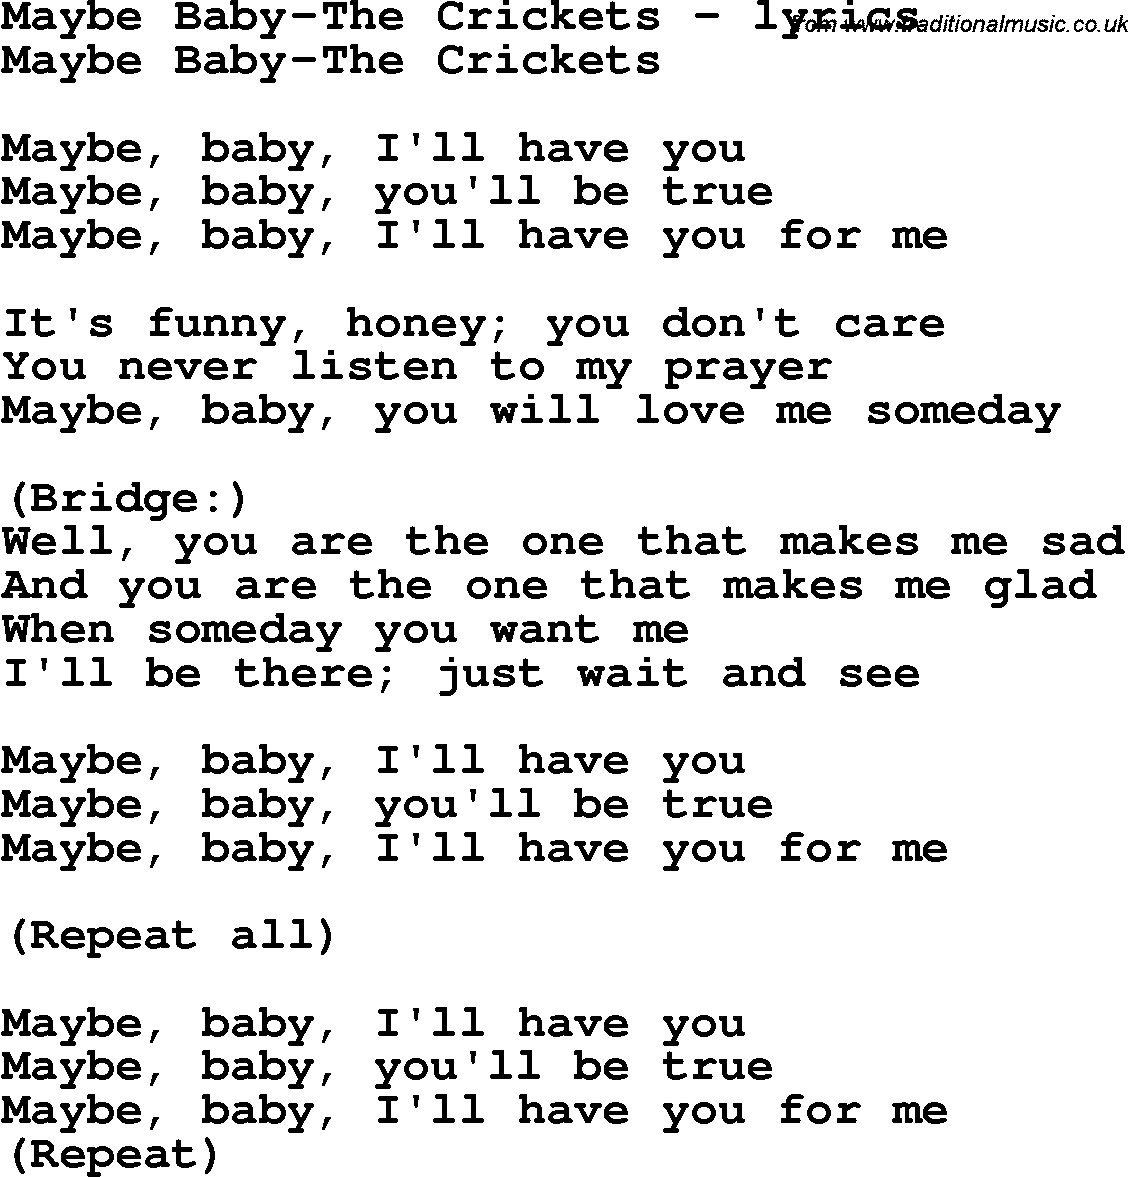 Love Song Lyrics for: Maybe Baby-The Crickets